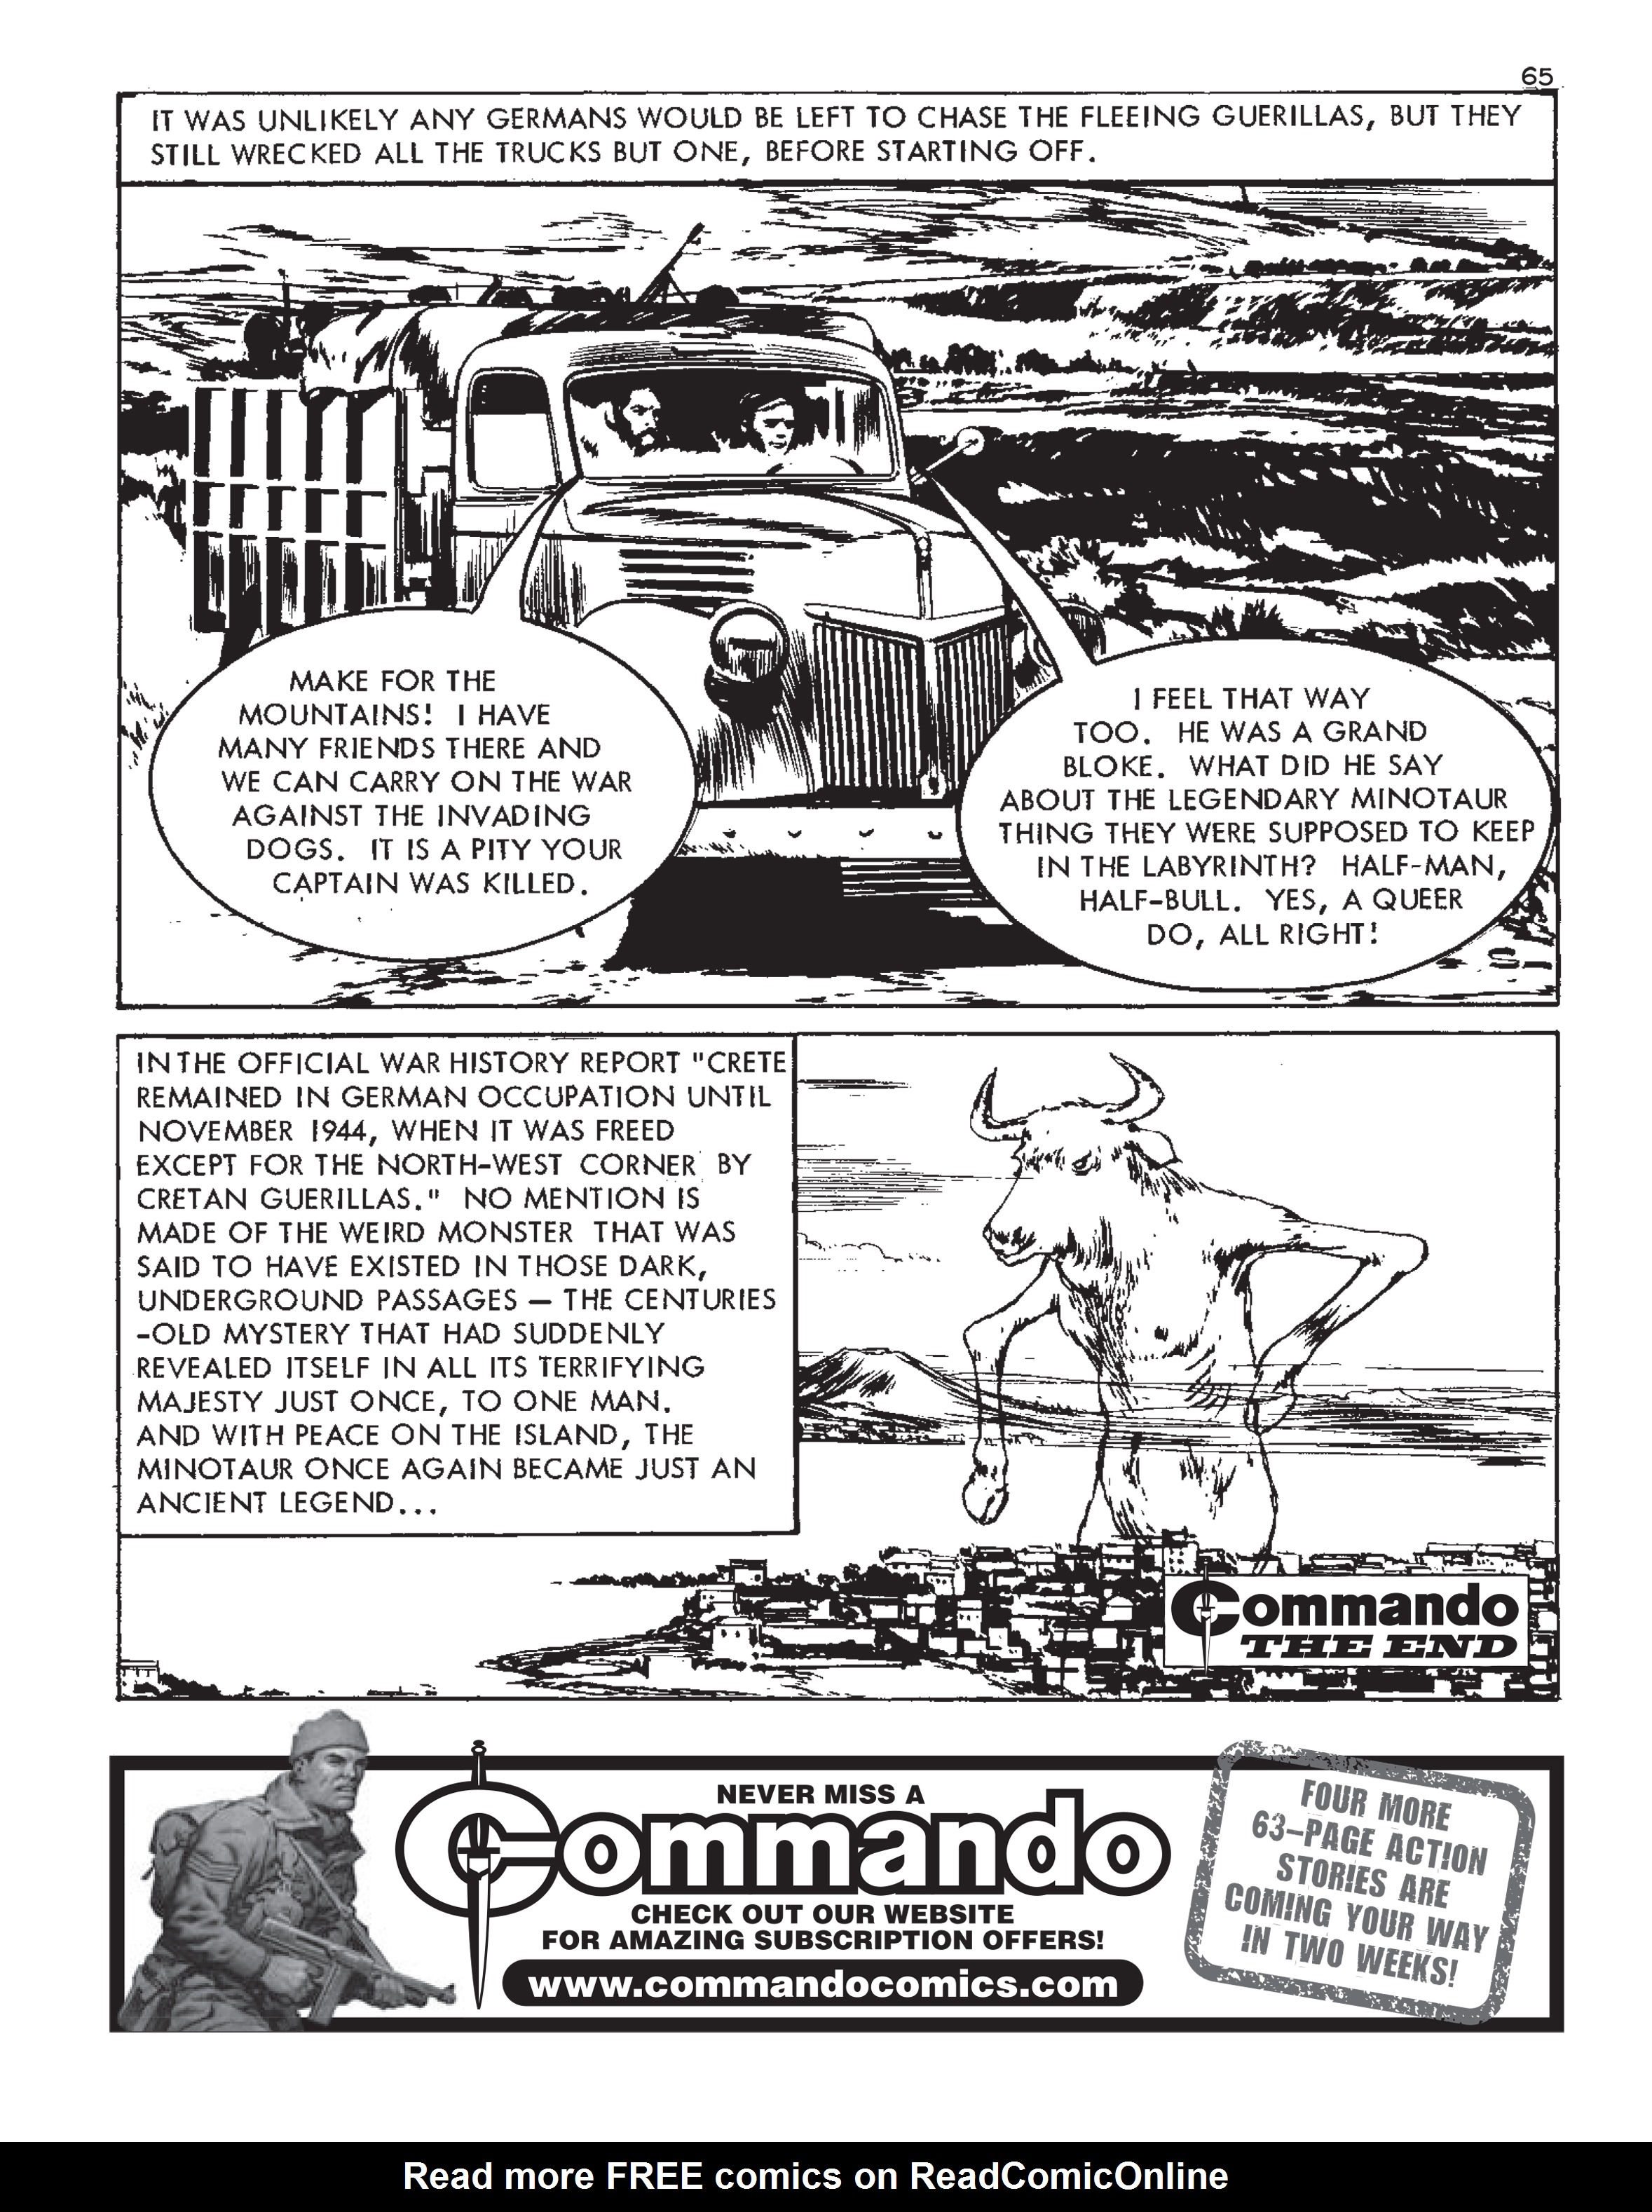 Read online Commando: For Action and Adventure comic -  Issue #5200 - 64